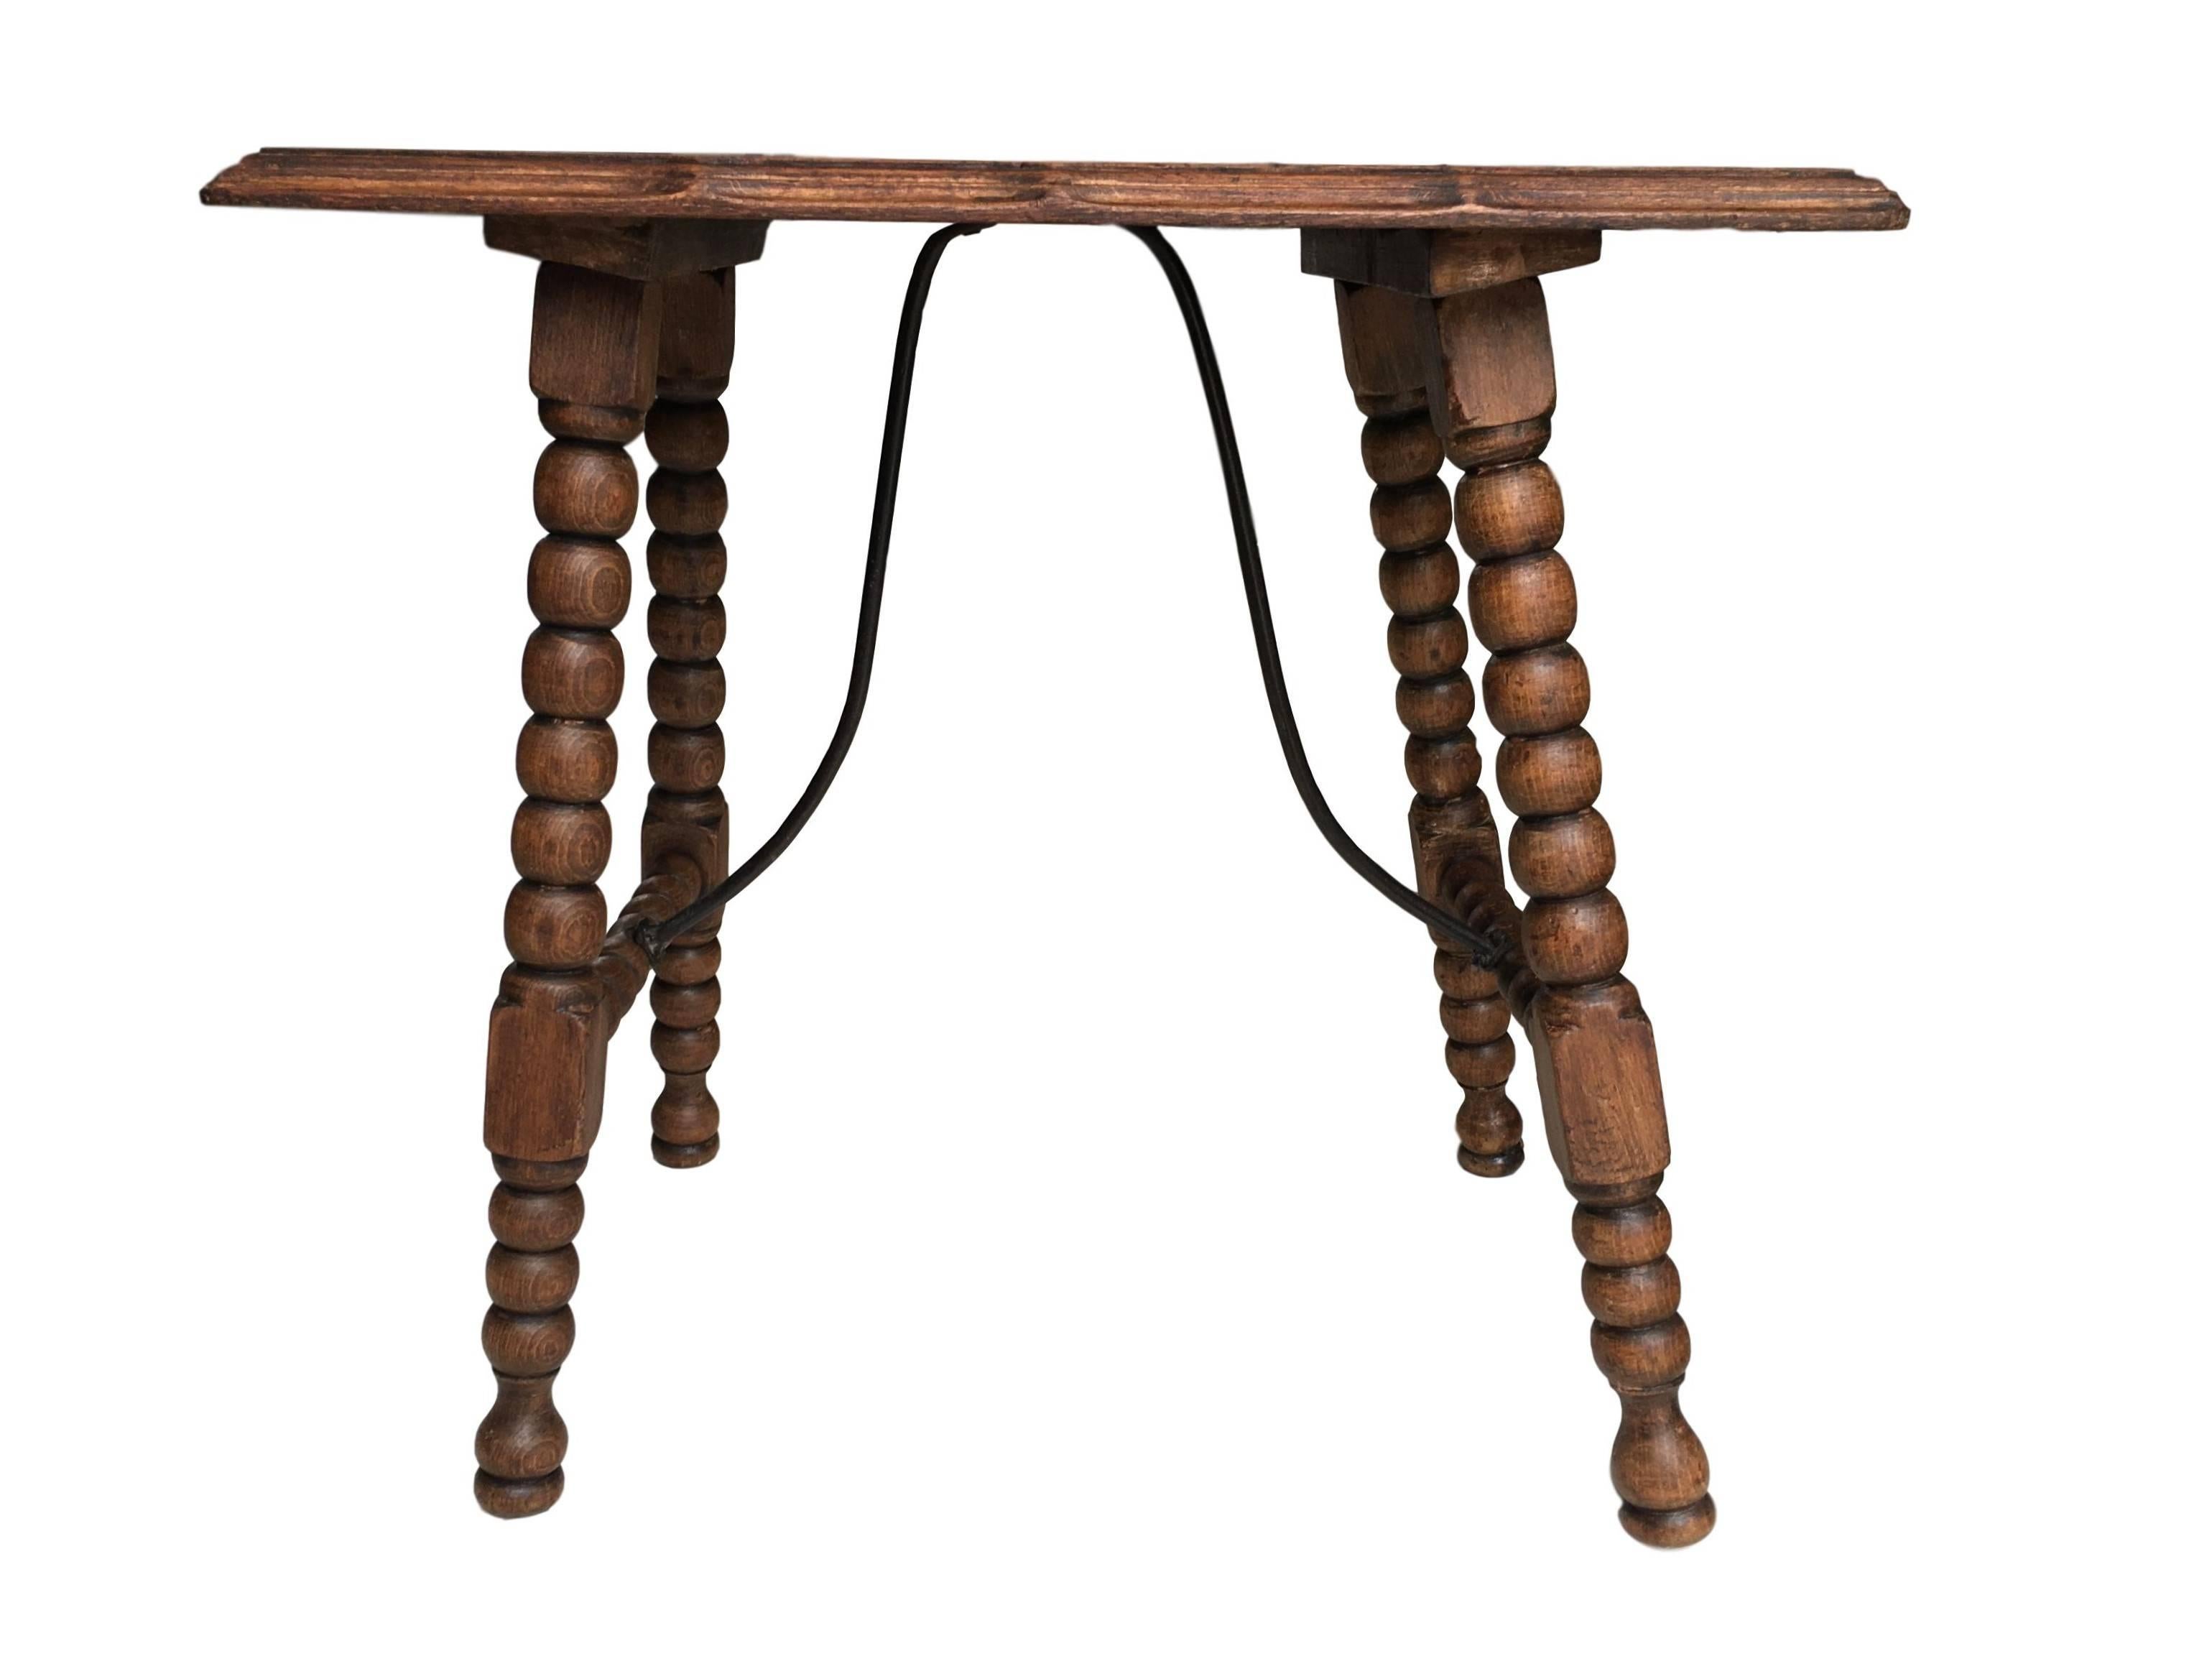 19th century Spanish trestle table in walnut and iron. This piece has a great scale, lovely turned legs and iron stretcher. The top is made from a single piece of wood. This table could be used as an end table, nightstand, side table, or small desk.